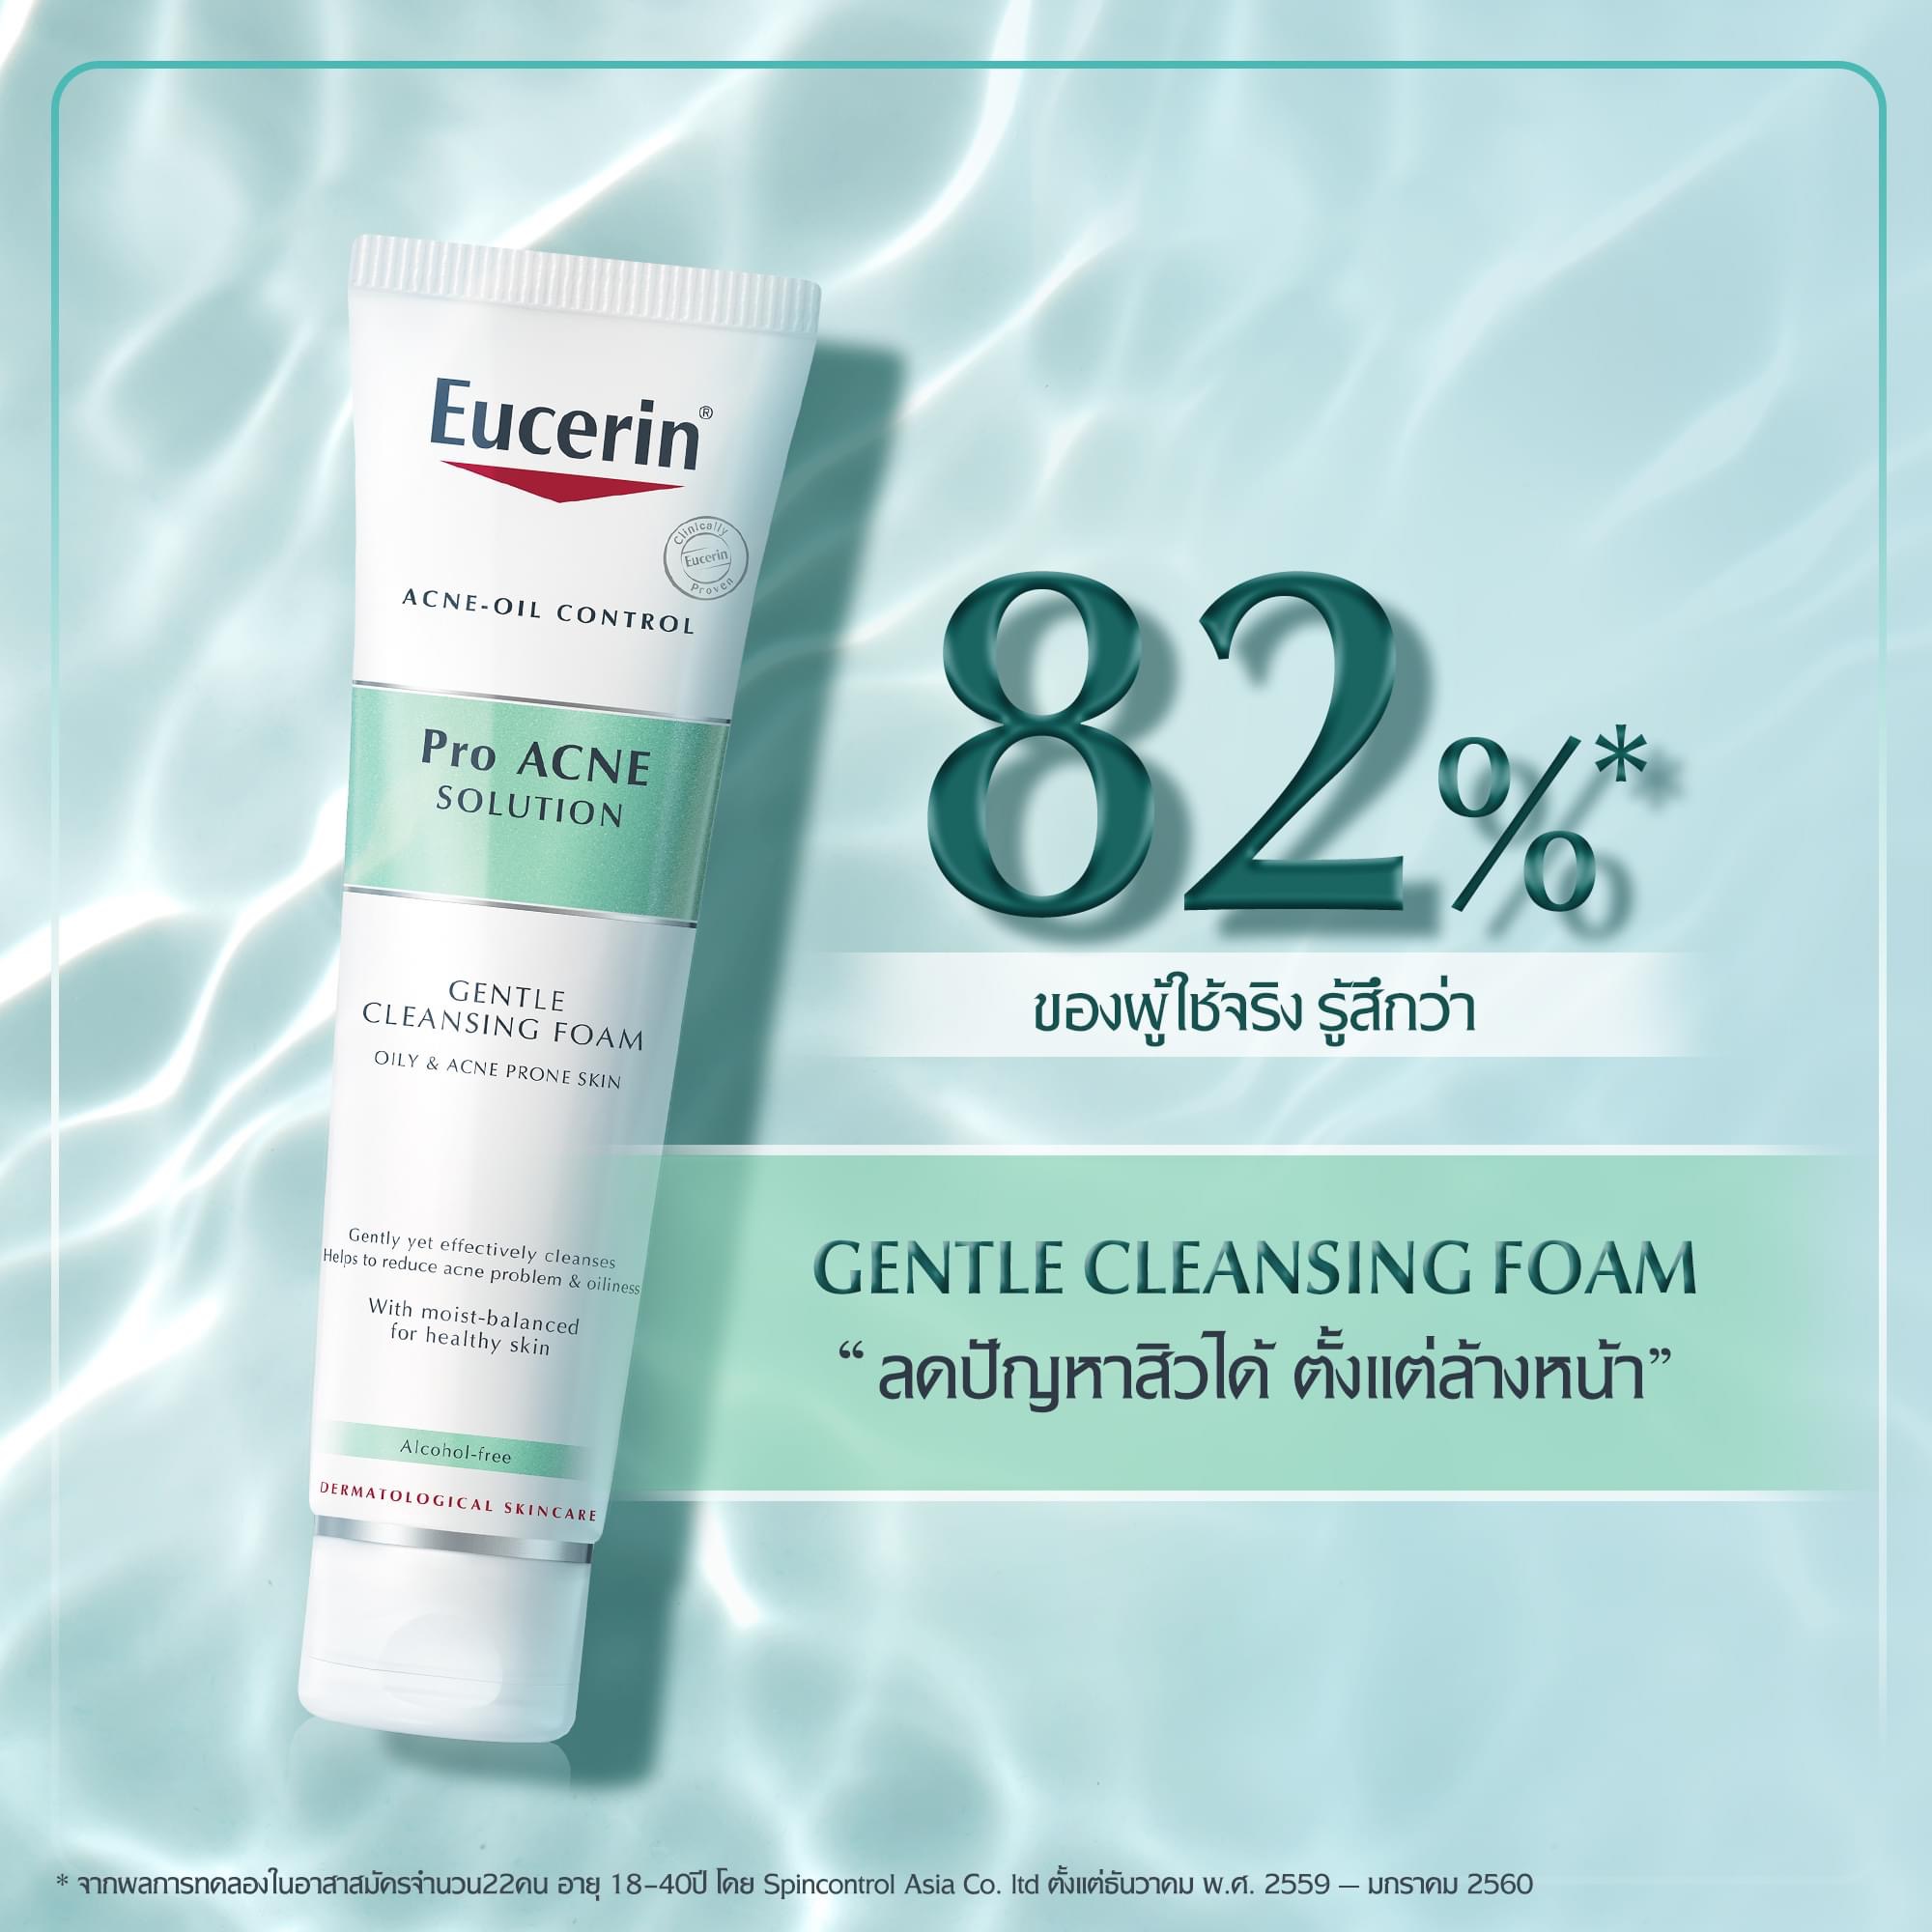 Eucerin Pro Acne Solution Gentle Cleansing Foam 150 mg. | Lazada.co.th